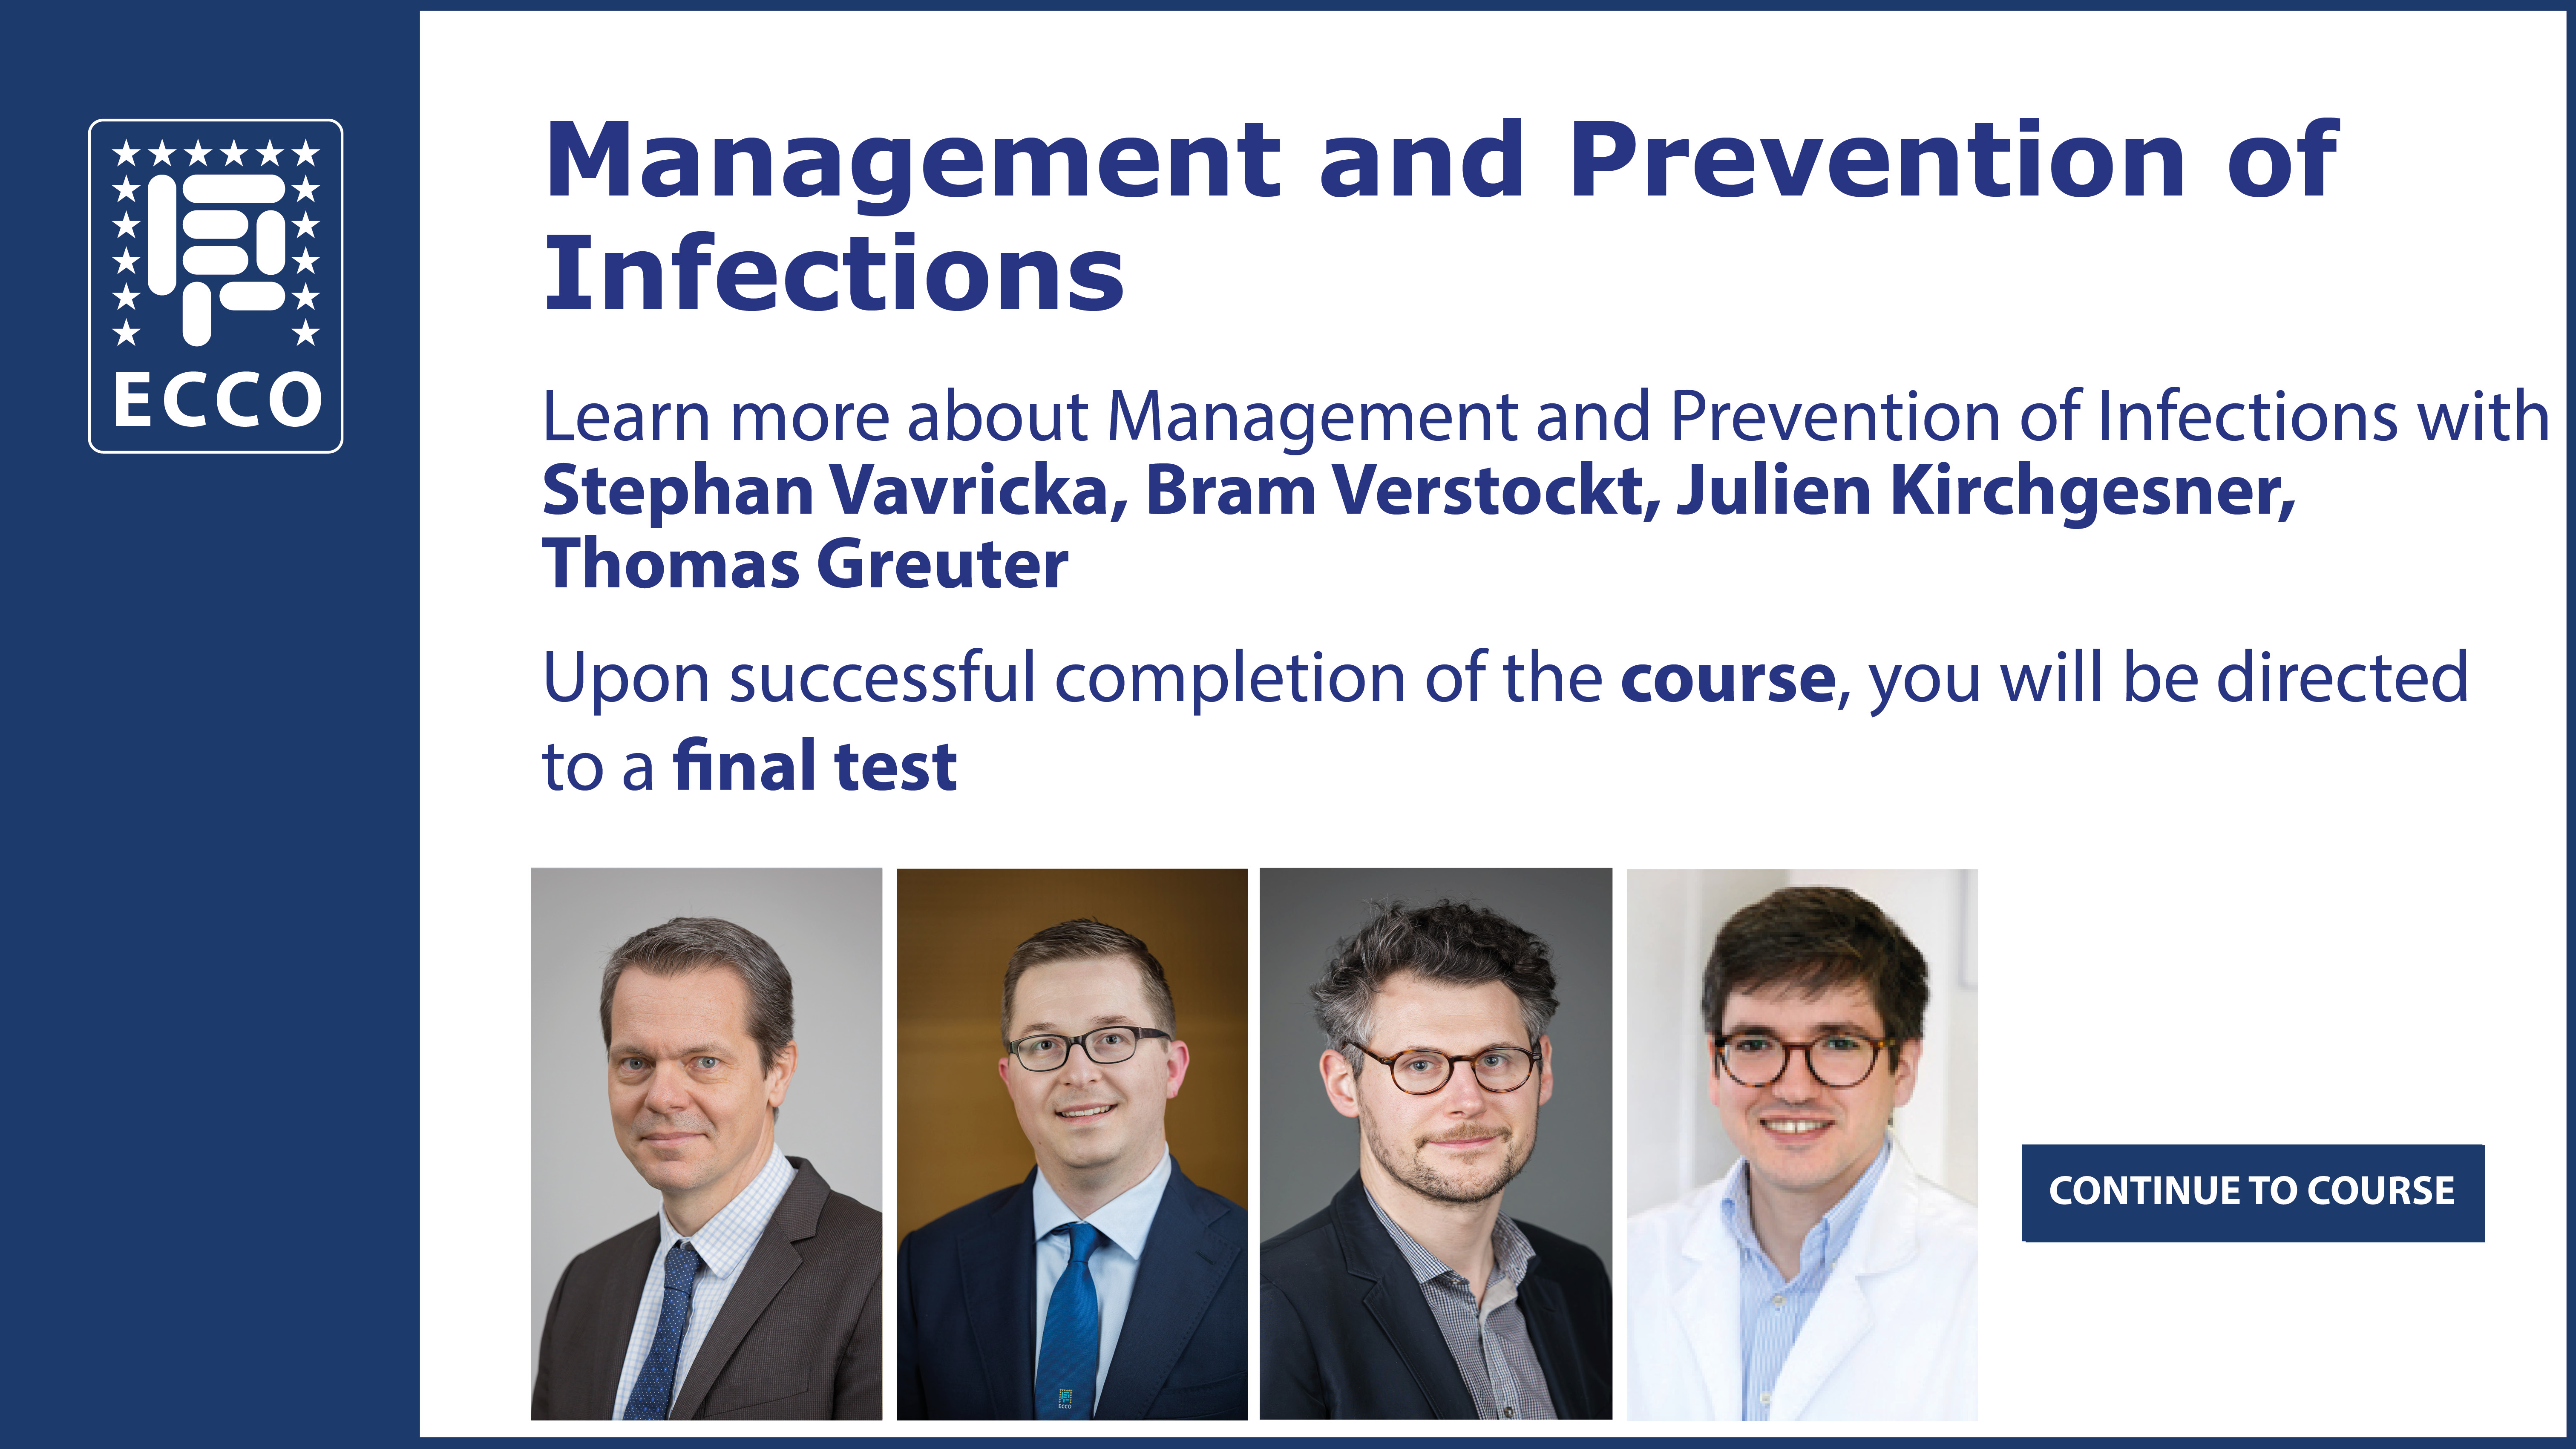 Management and Prevention of Infections